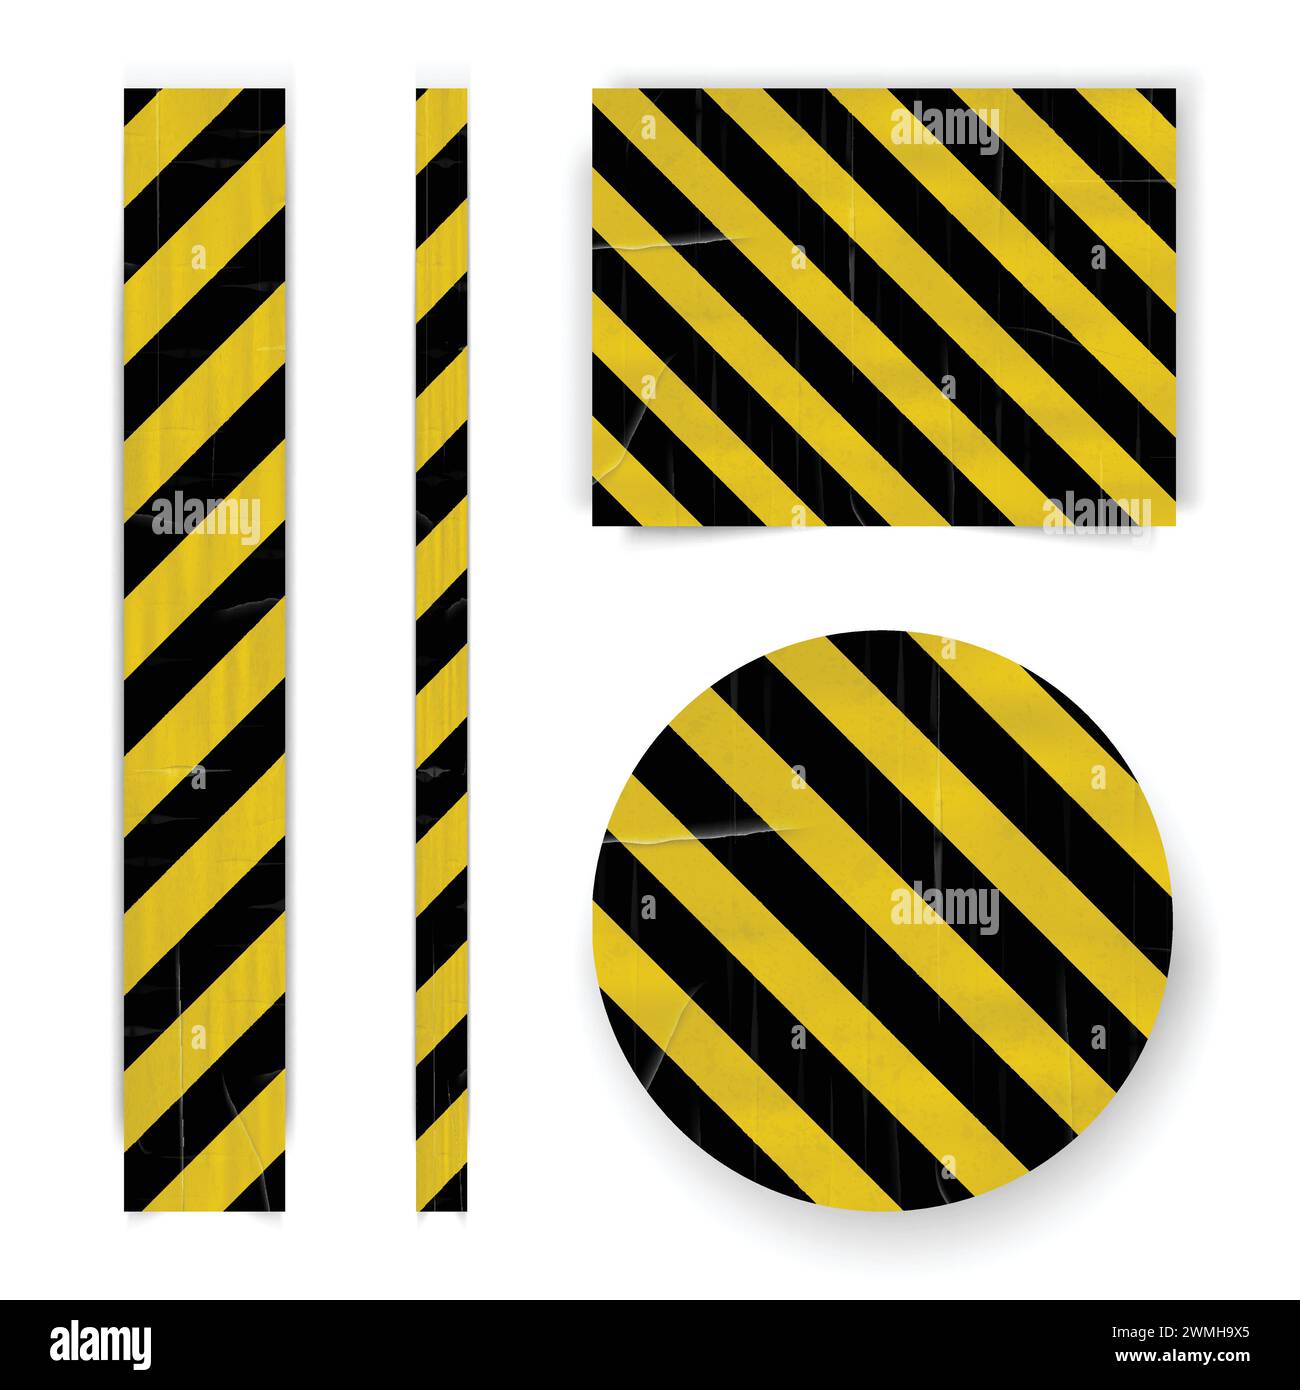 Crime scene realistic tape, police line and danger tape, road safety tape vector illustration Stock Vector